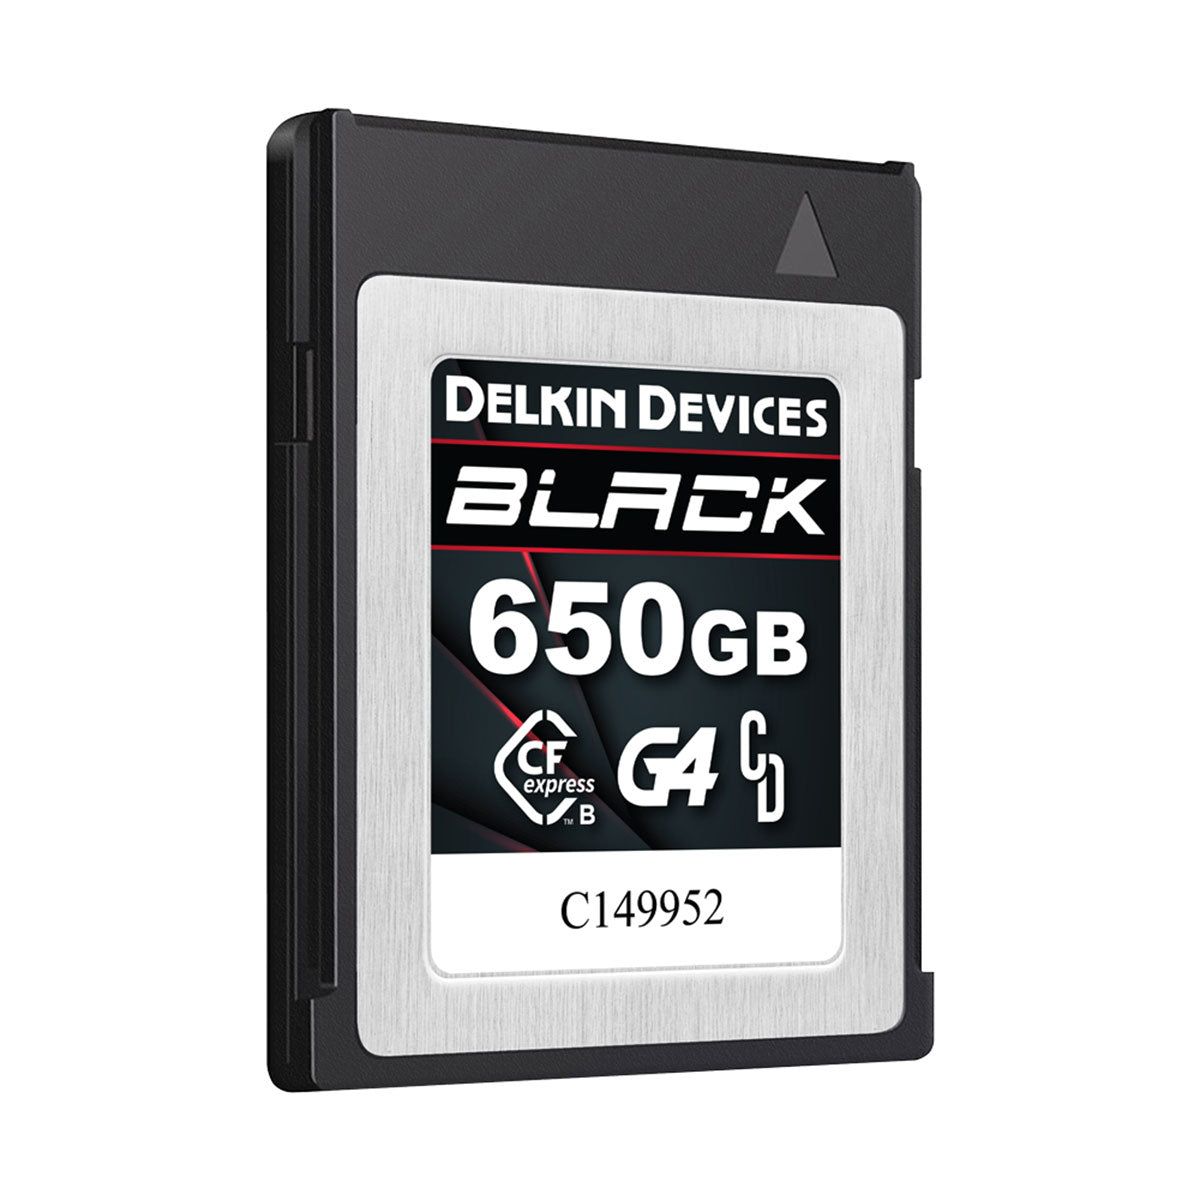 Delkin Devices 650GB BLACK G4 CFexpress Type B Memory Card